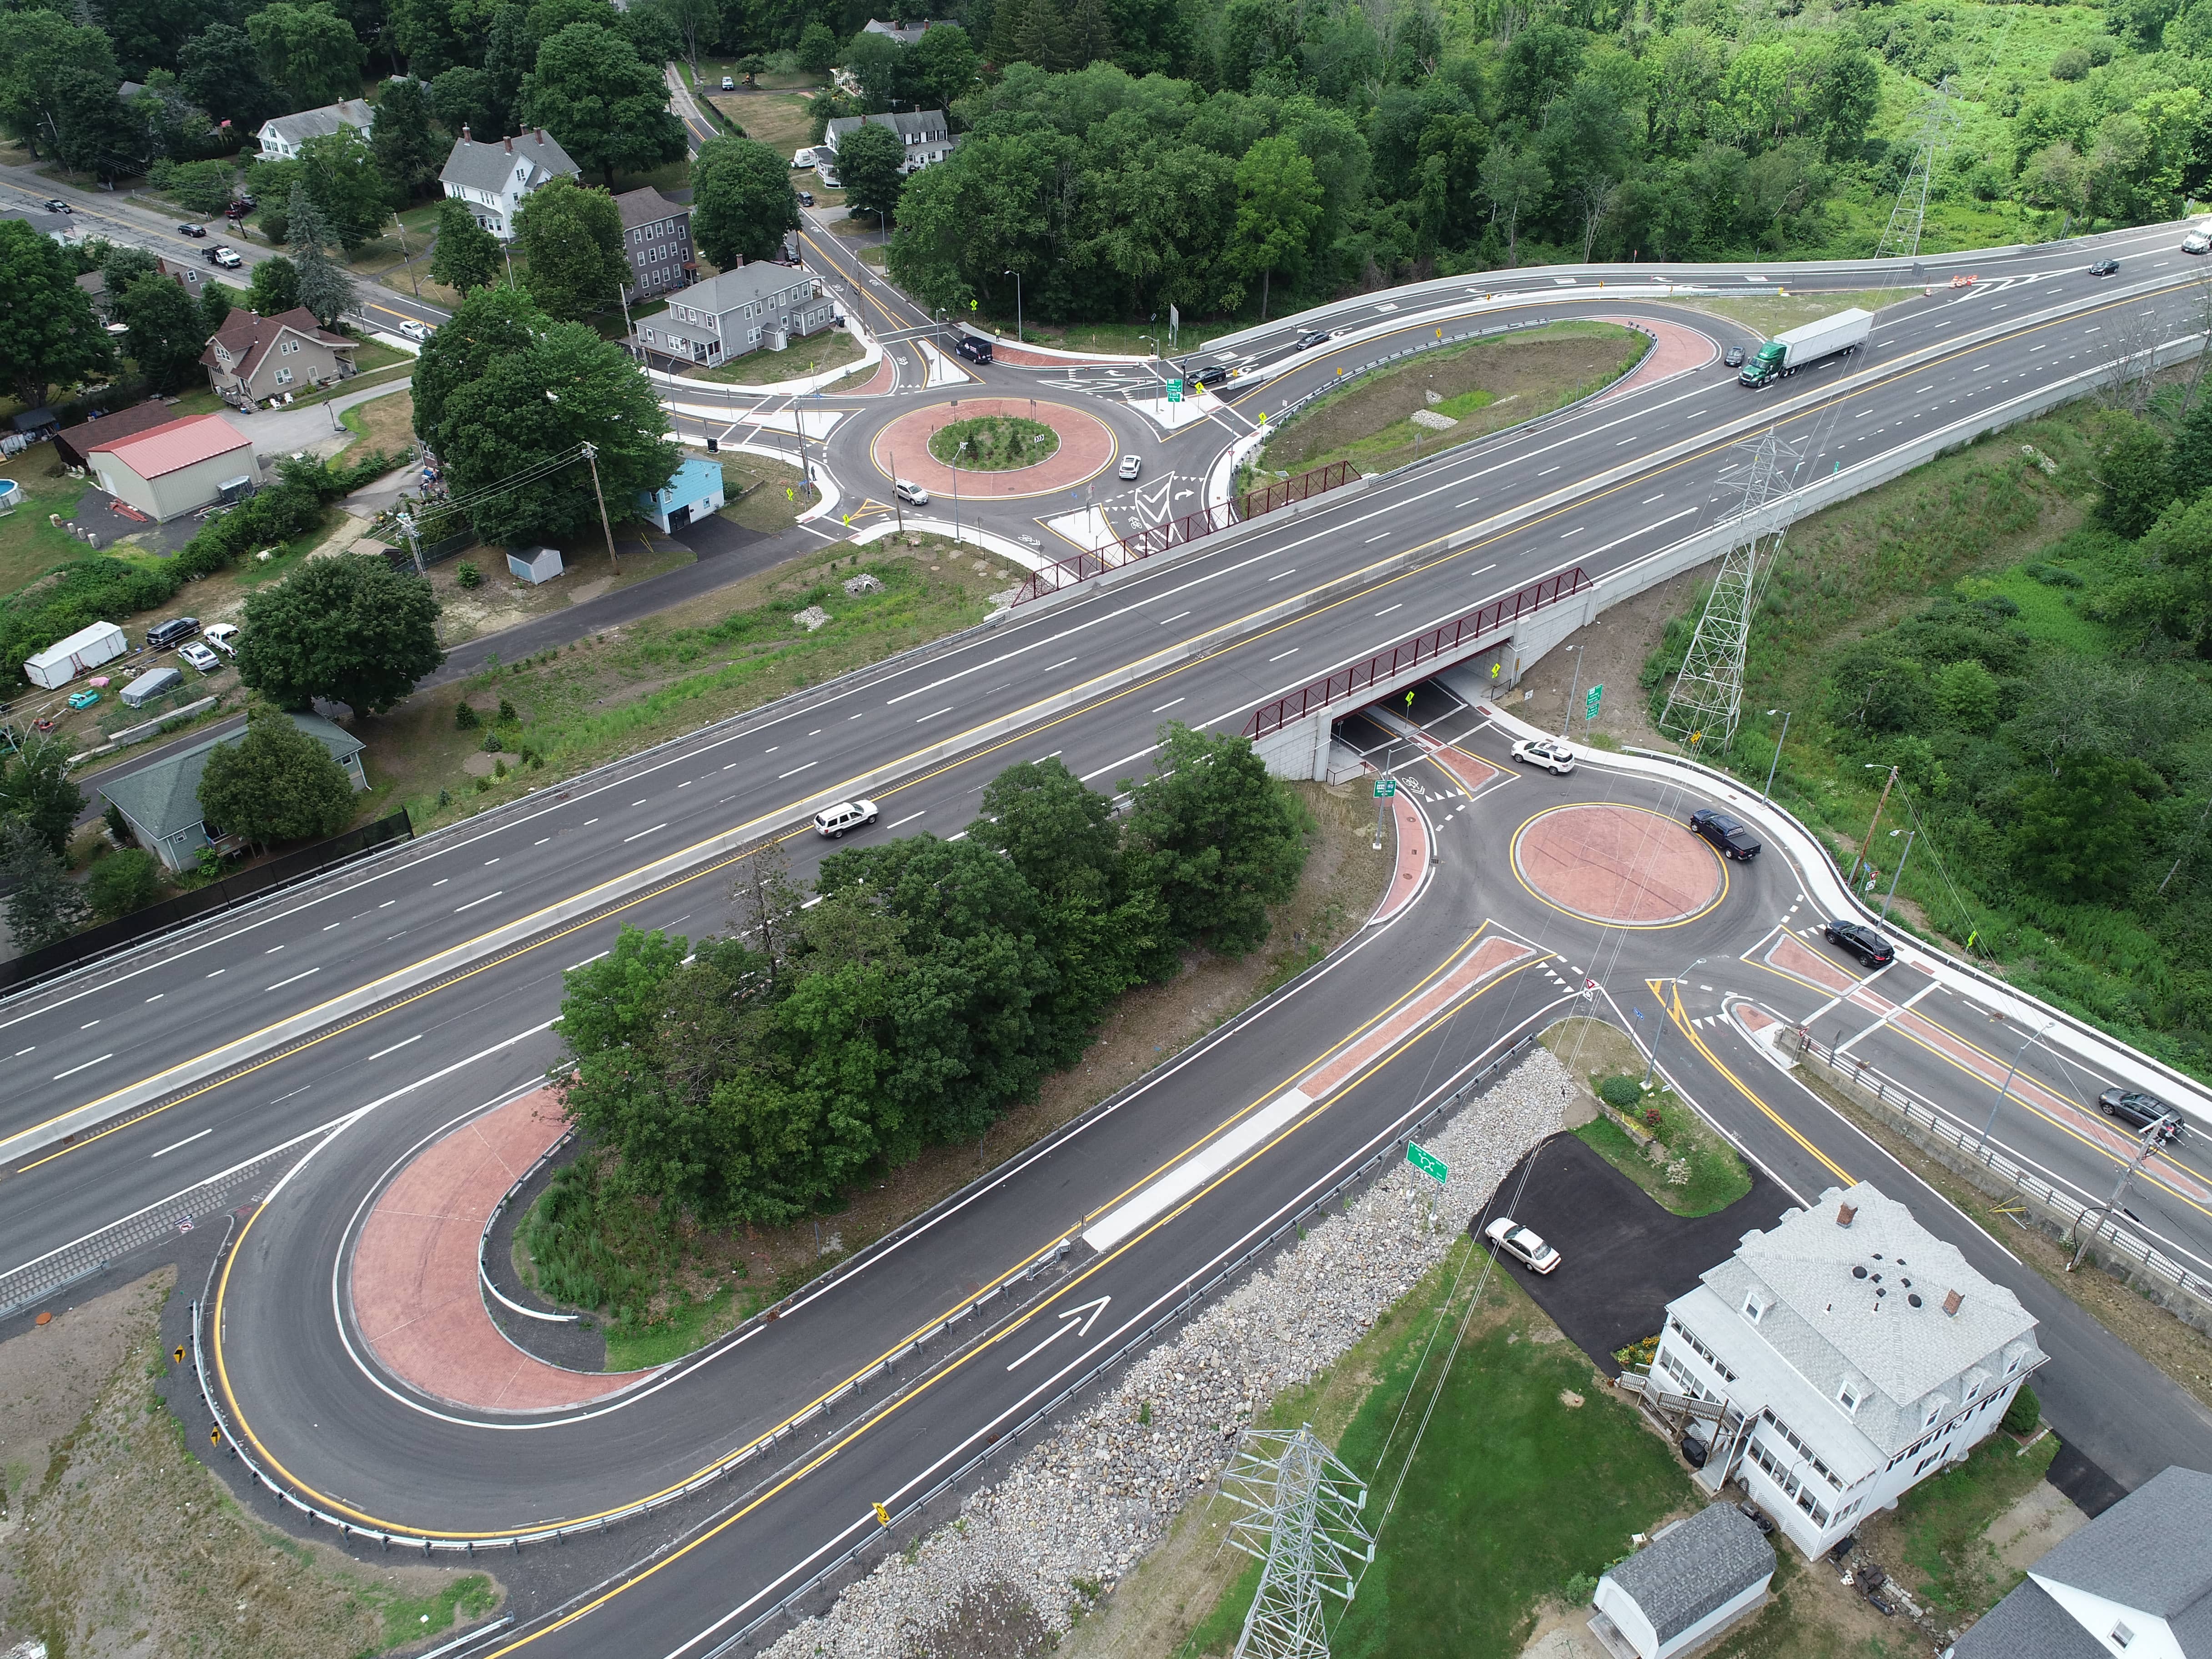 Millbury, Route 146/W. Main Street. Freeway interchange side-by-side roundabouts, one of which being a mini-roundabout.